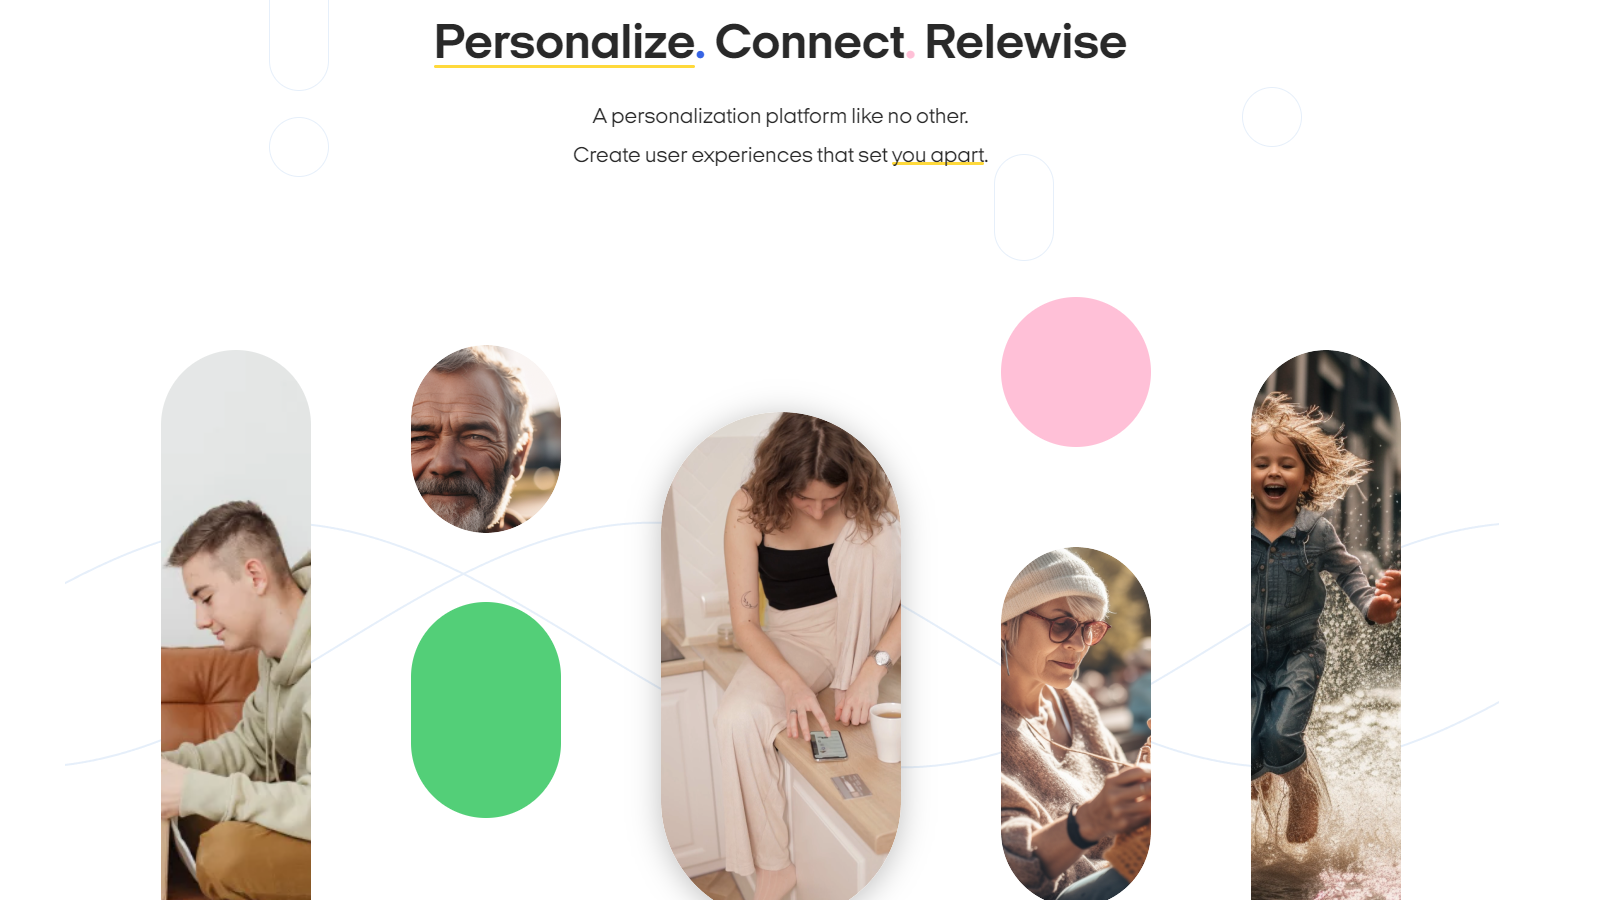 Personalize. Connect. Relewise.